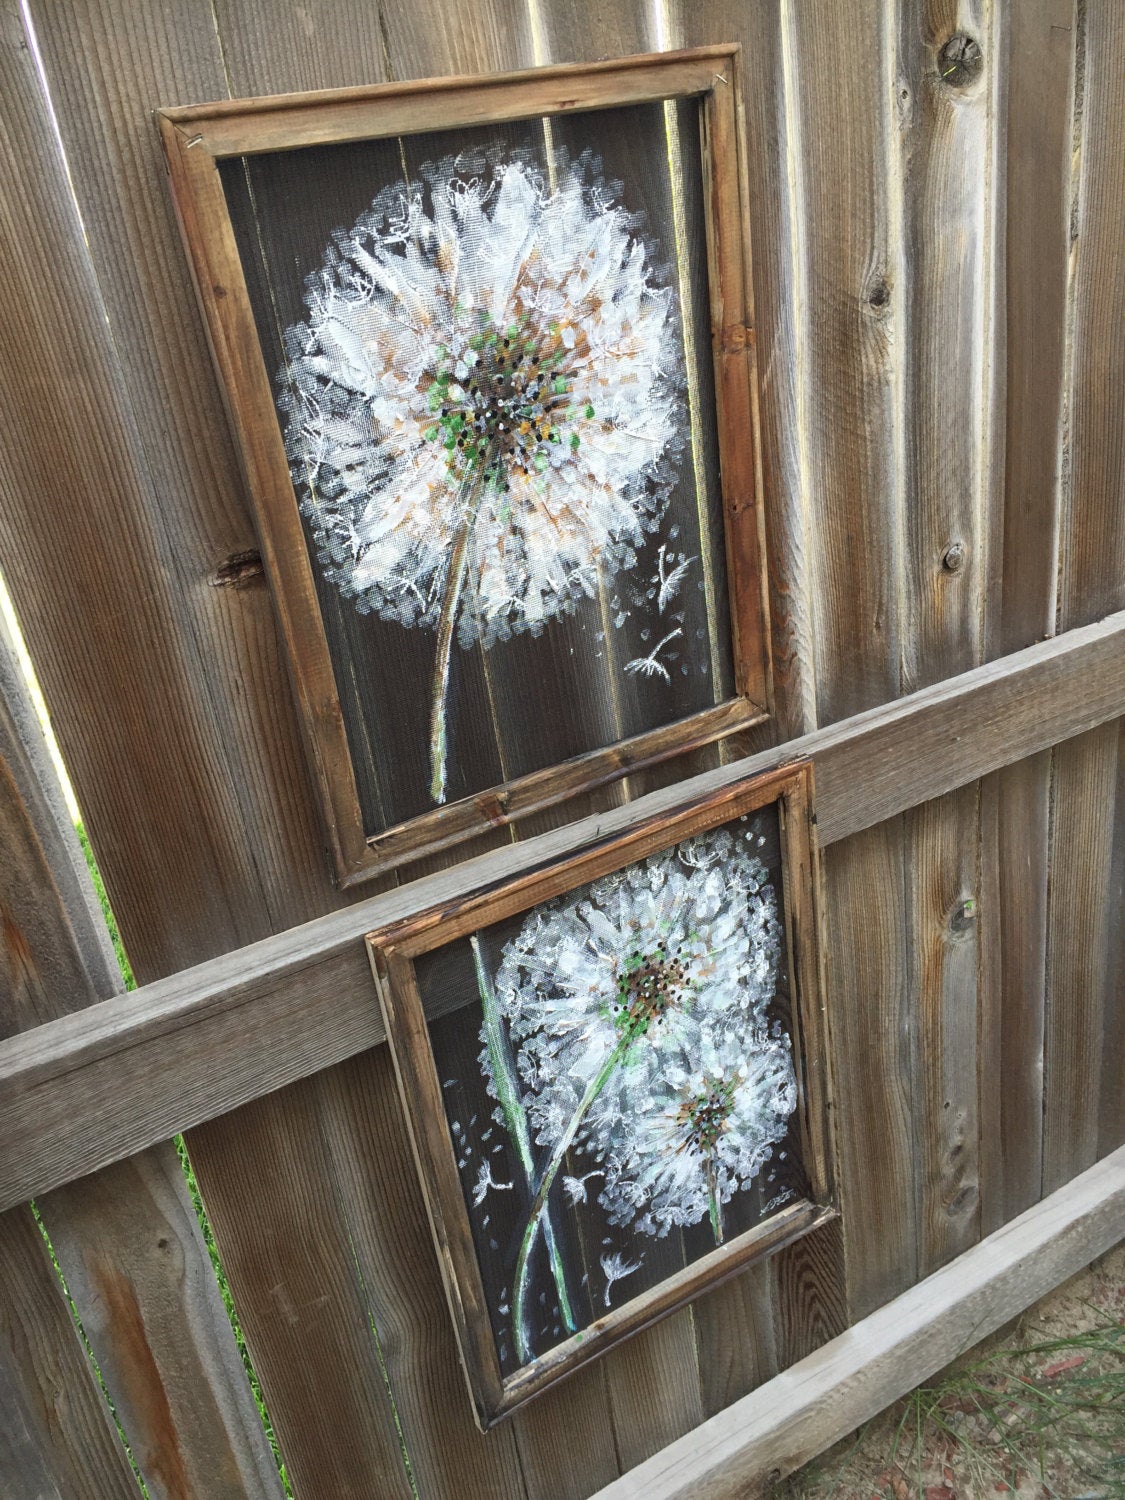 Set of 2 dandelion art , recycled wood frame painting on screen DANDELION,Made to order!!!!